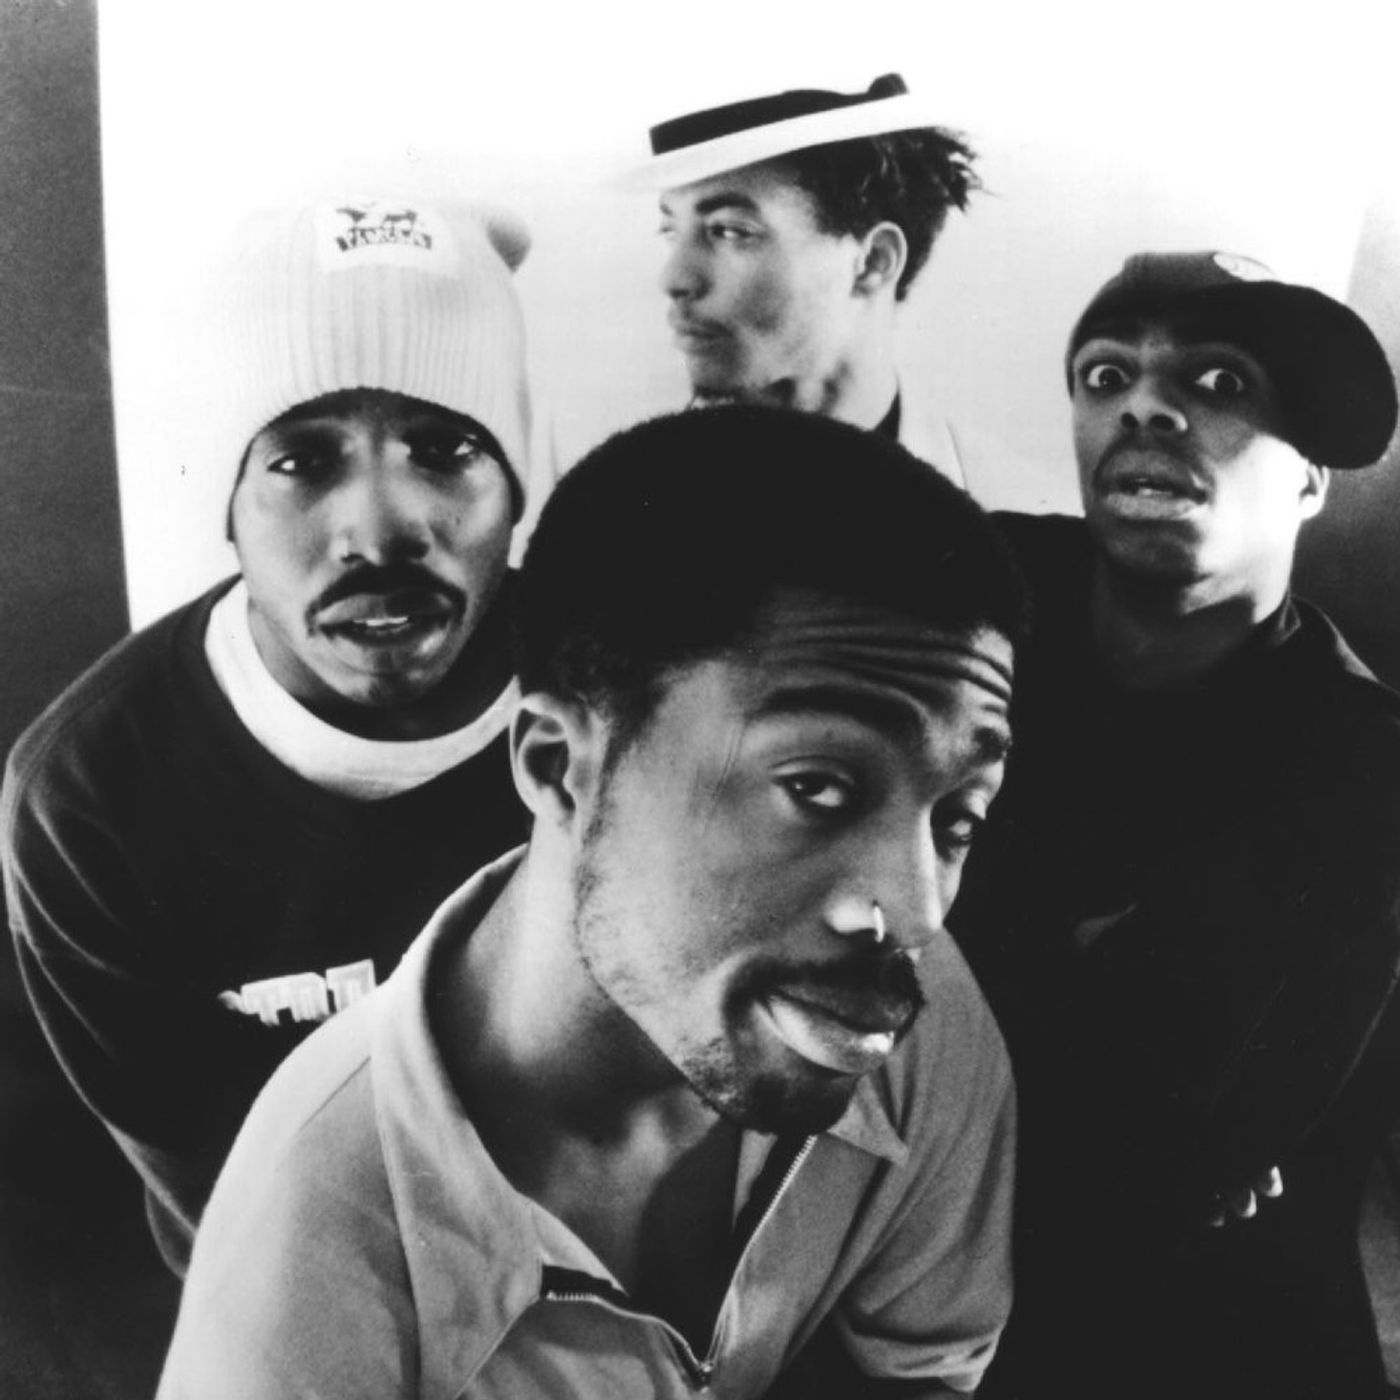 Artist of the Week: The Pharcyde